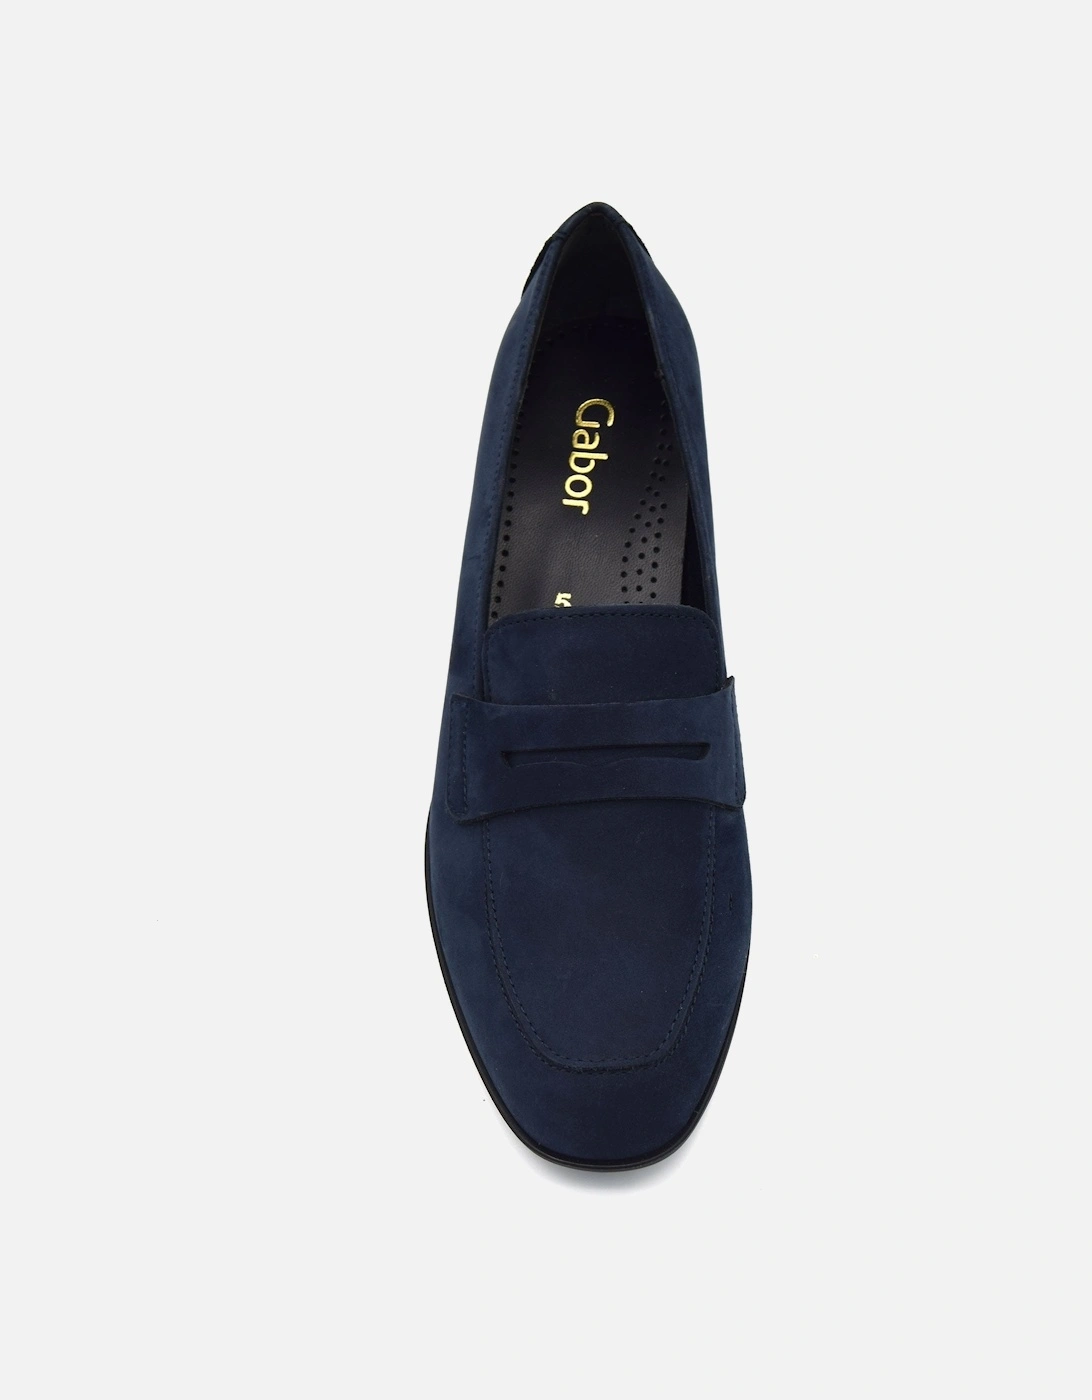 RIGHT LADIES PENNY LOAFER